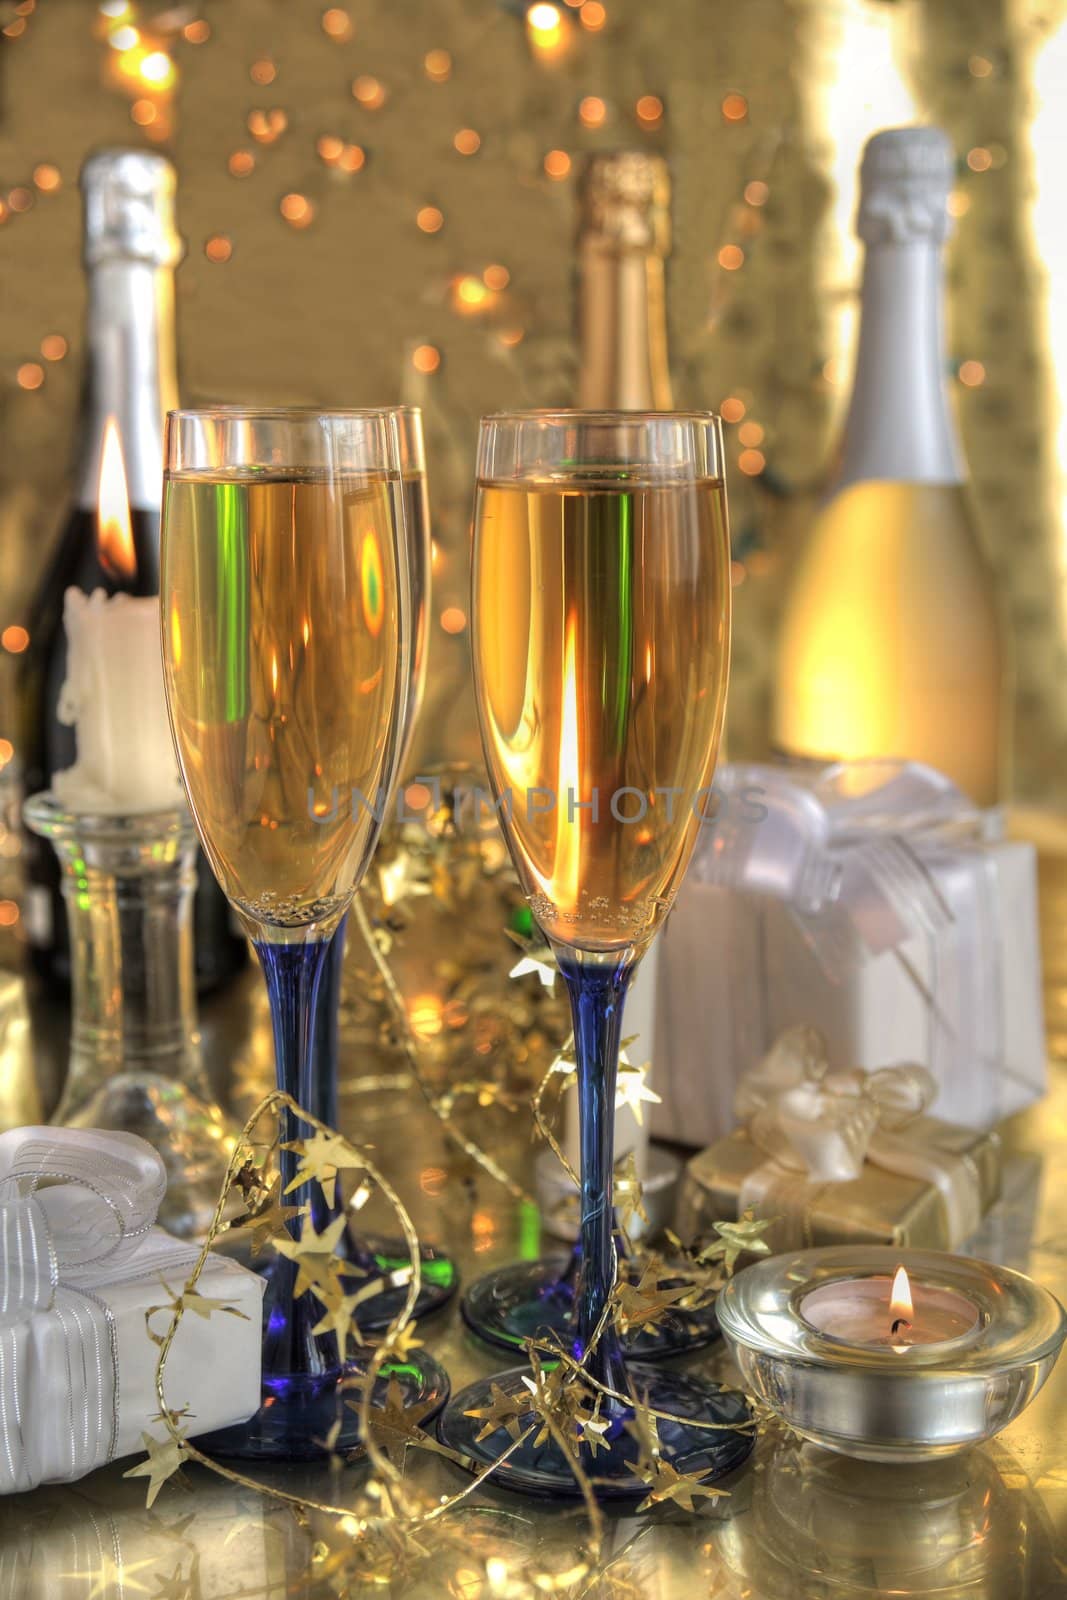 Champagne in glasses,bottles,gifts,candle light and blurred lights on gold background